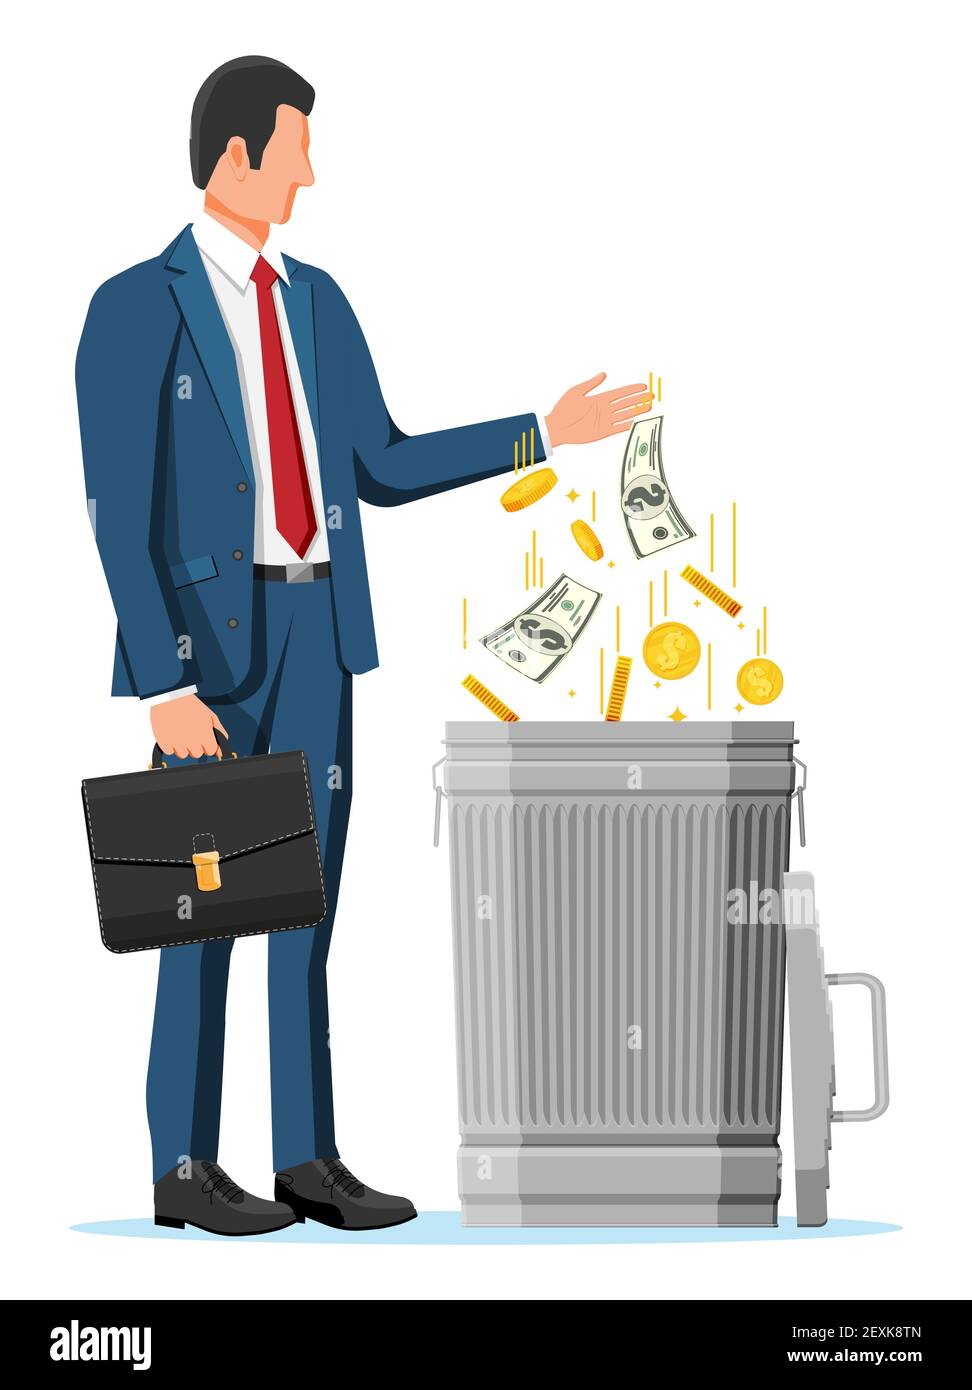 Businessman putting golden coins and dollar bills in trash. Garbage waste investment. Losing or wasting money, overspending, bankruptcy or crisis. Vector illustration in flat style Stock Vector